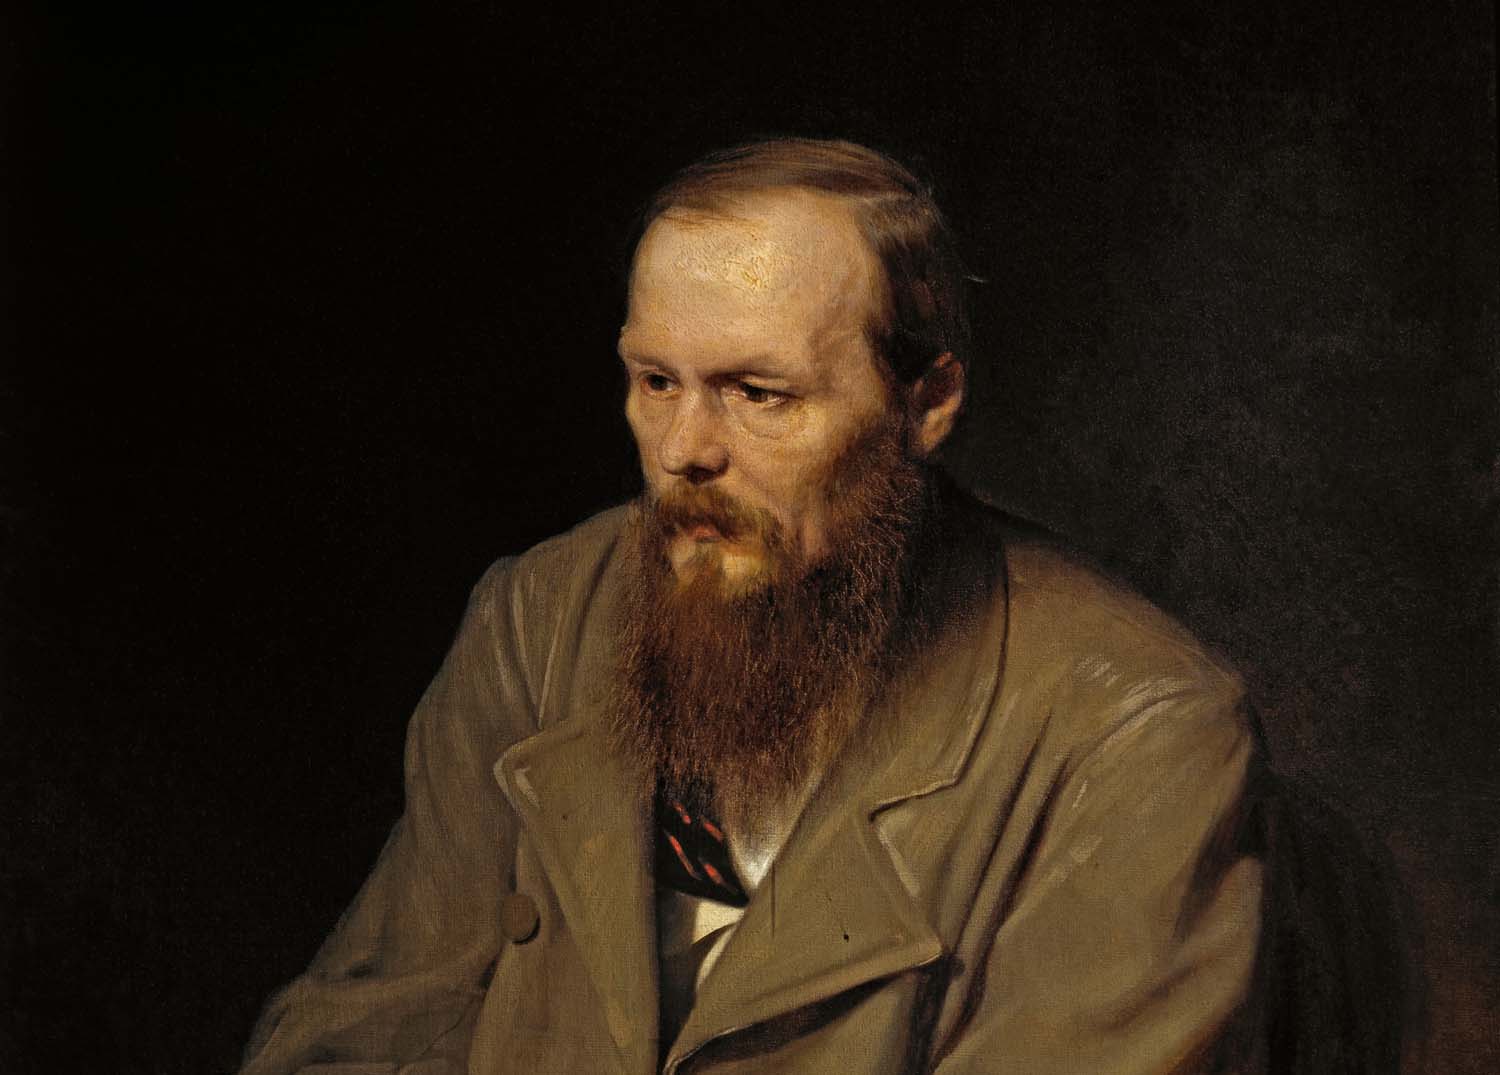 Notes from the Underground by Feodor Dostoevsky